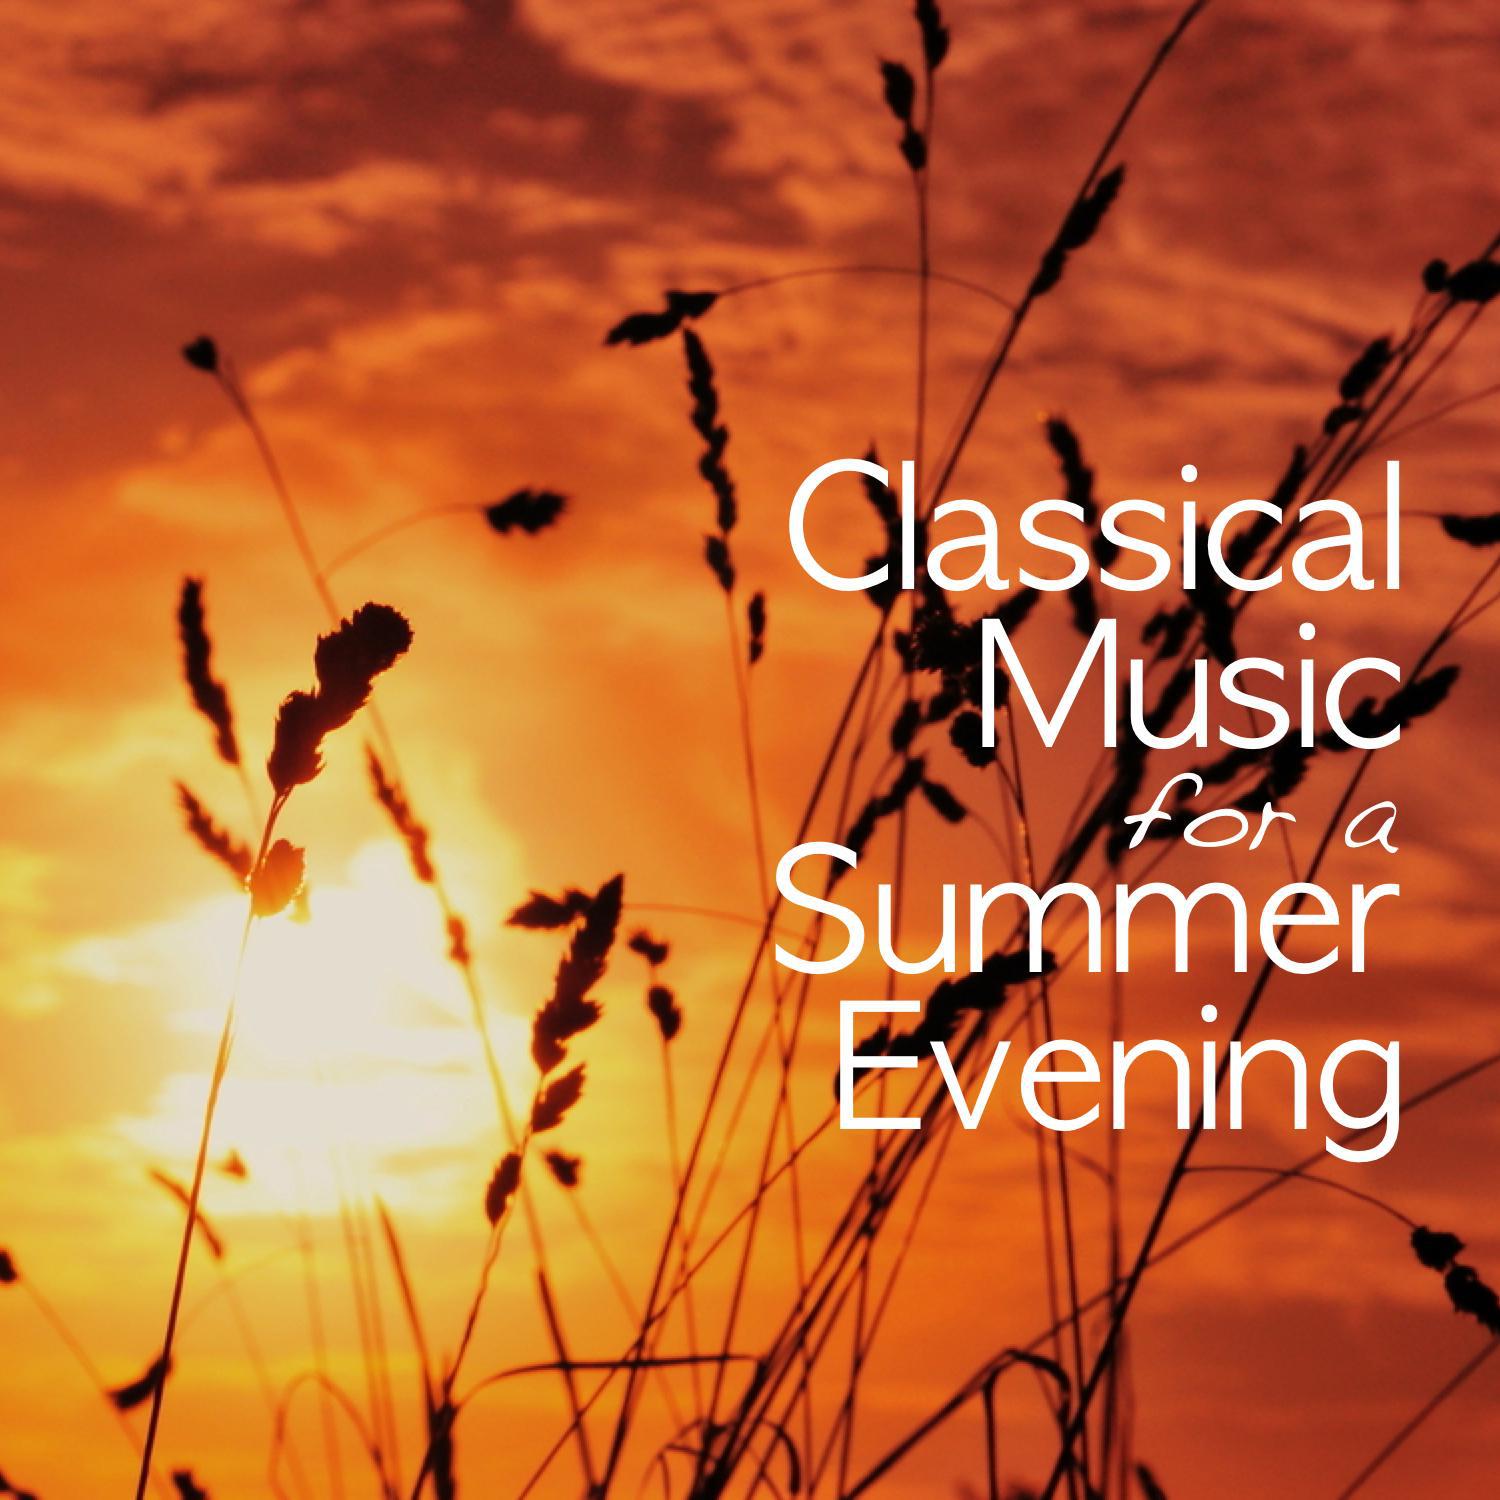 Classical Music for a Summer Evening